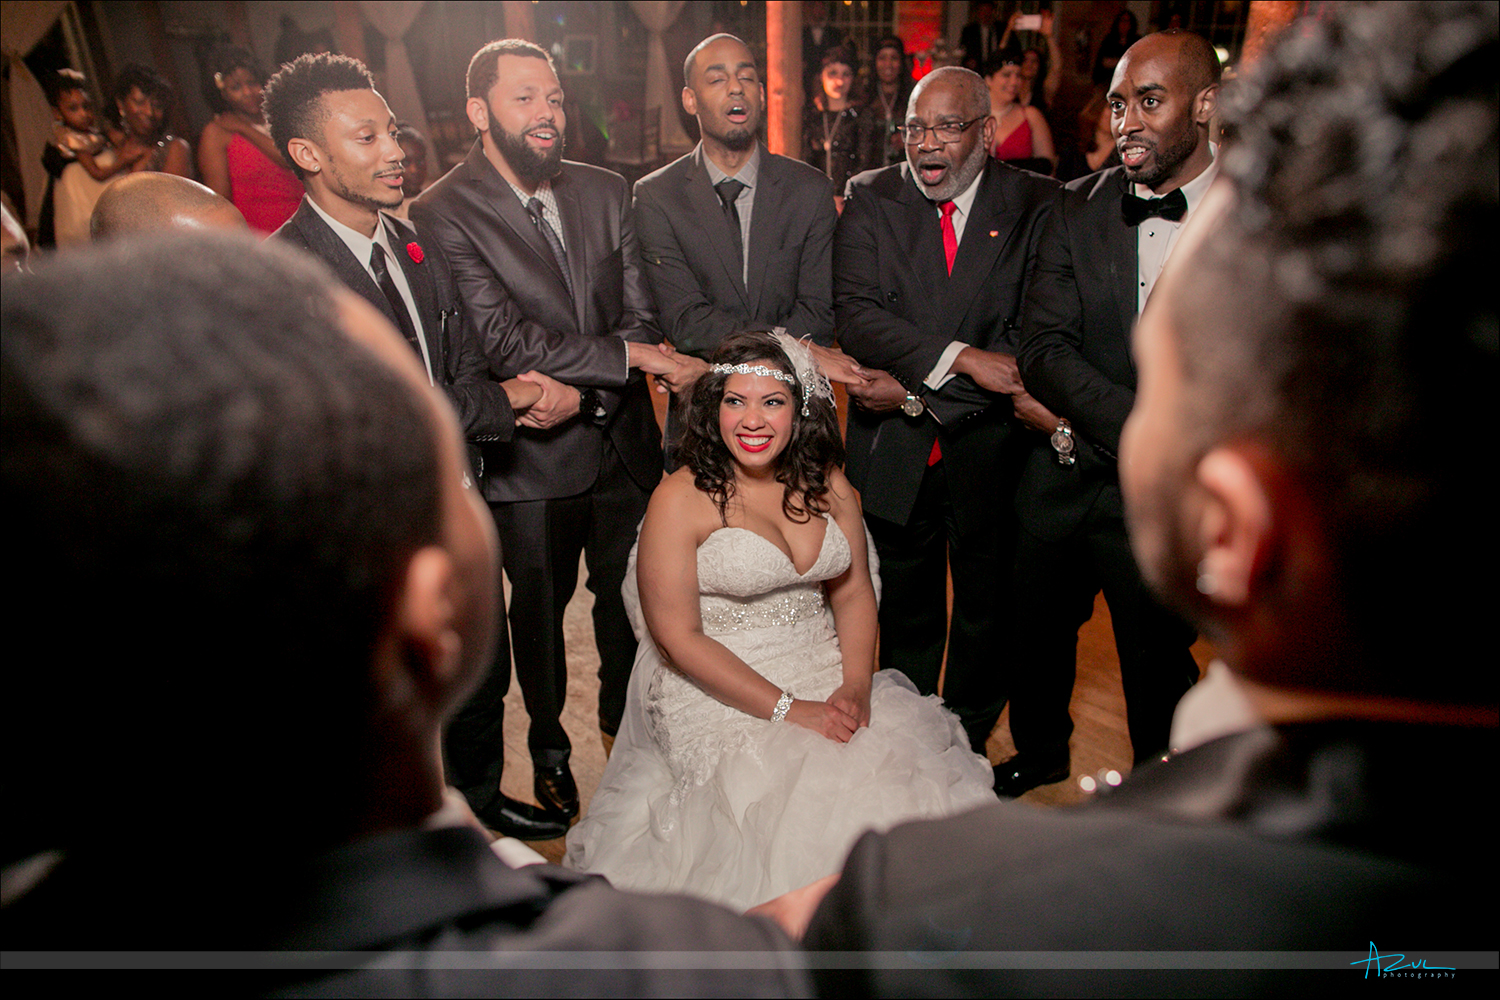 Fraternity tradition is to sing to the bride while at the reception located at The Cotton Room